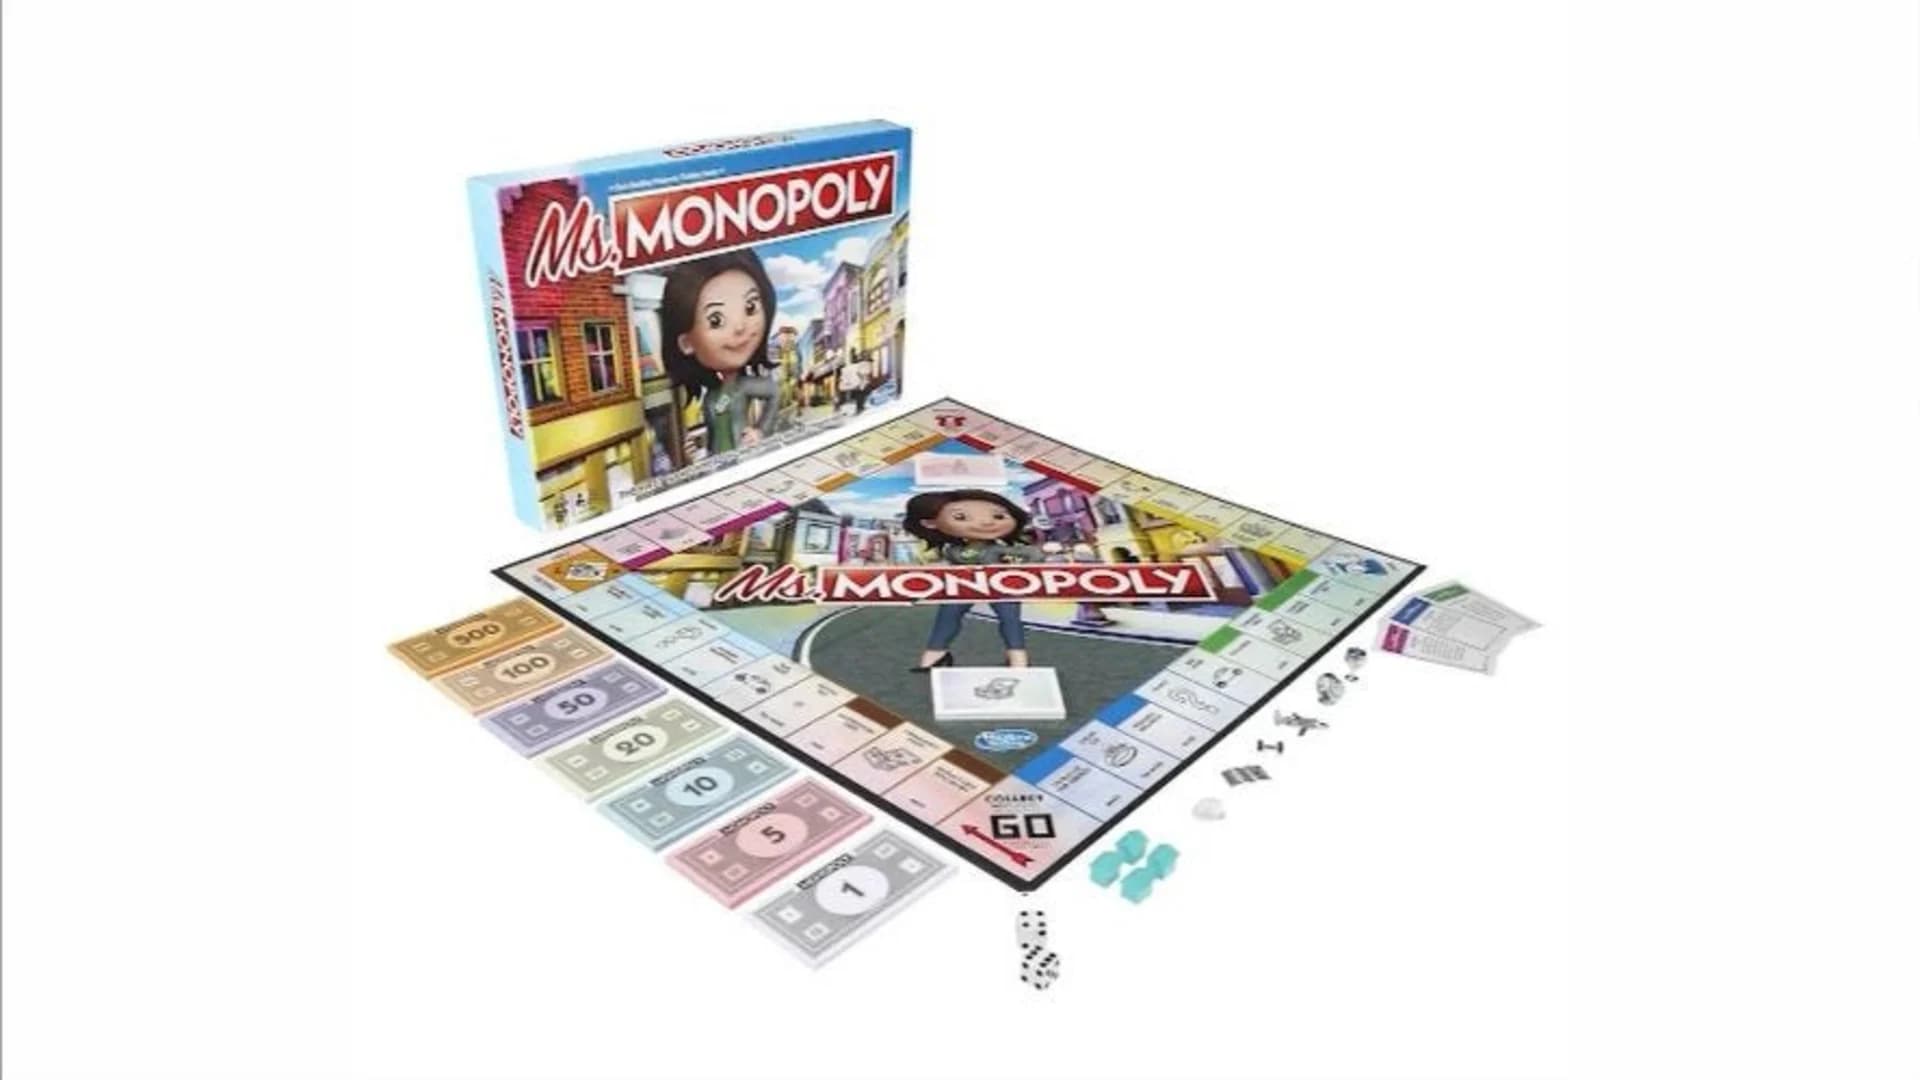 $240 for passing ‘Go’? -- Woman players make more than men in new Monopoly makeover